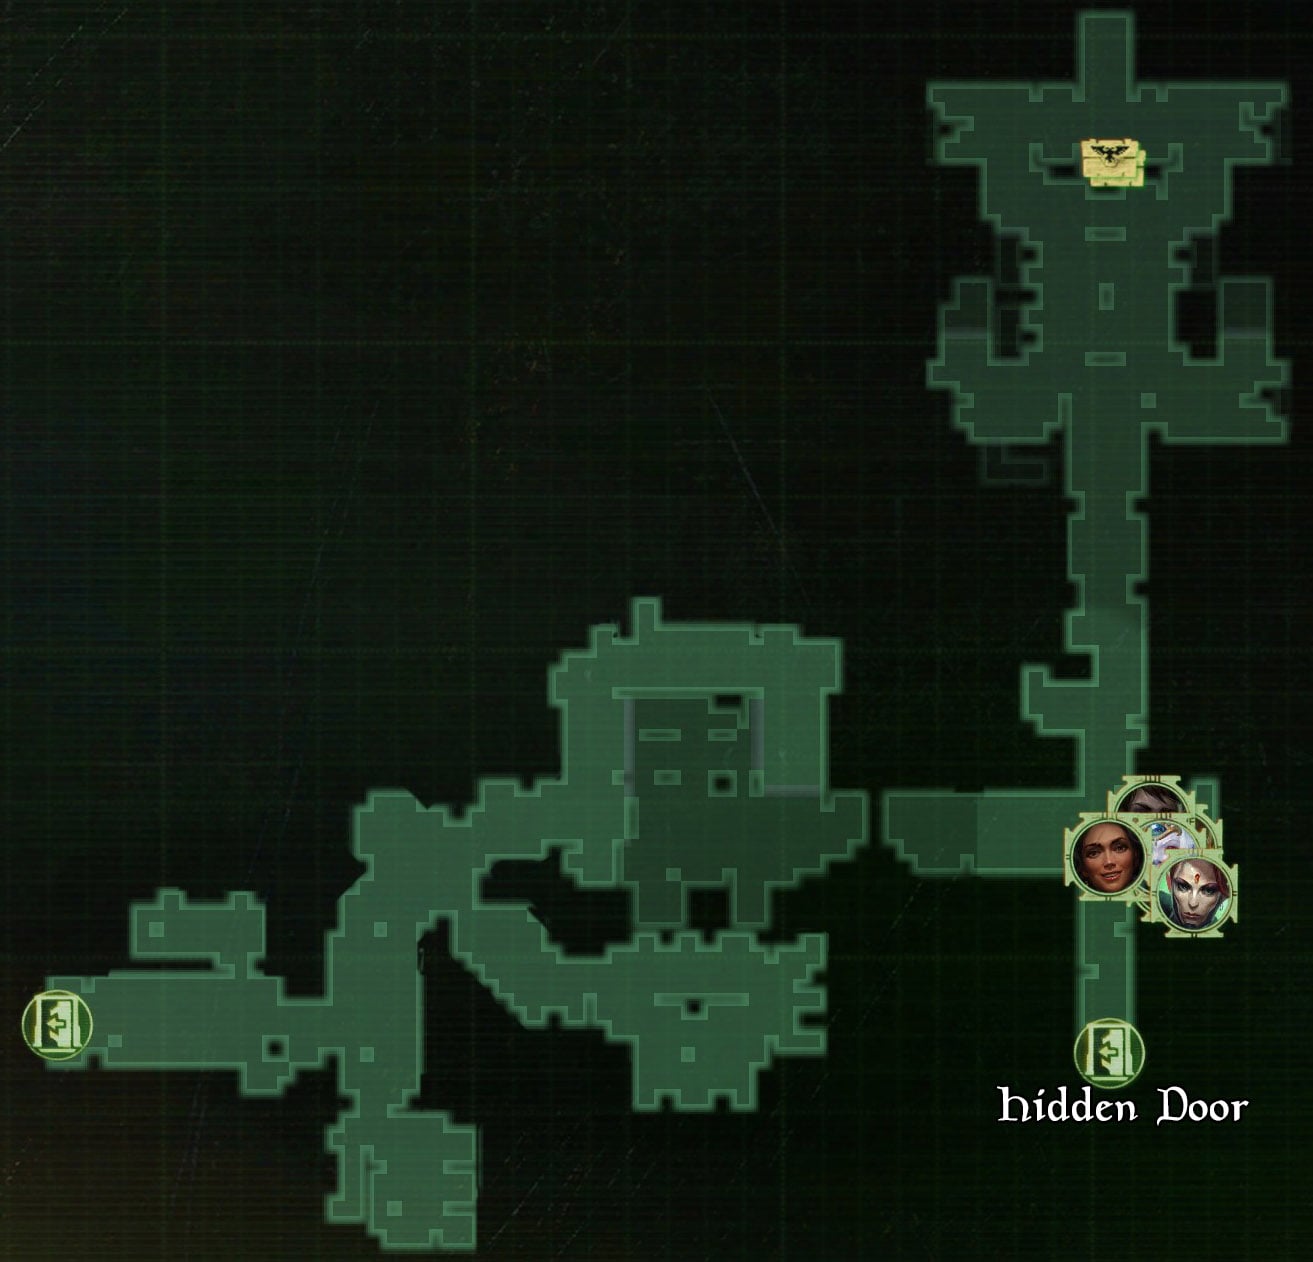 the haemonculus's laboratory map rogue trader wiki guide min